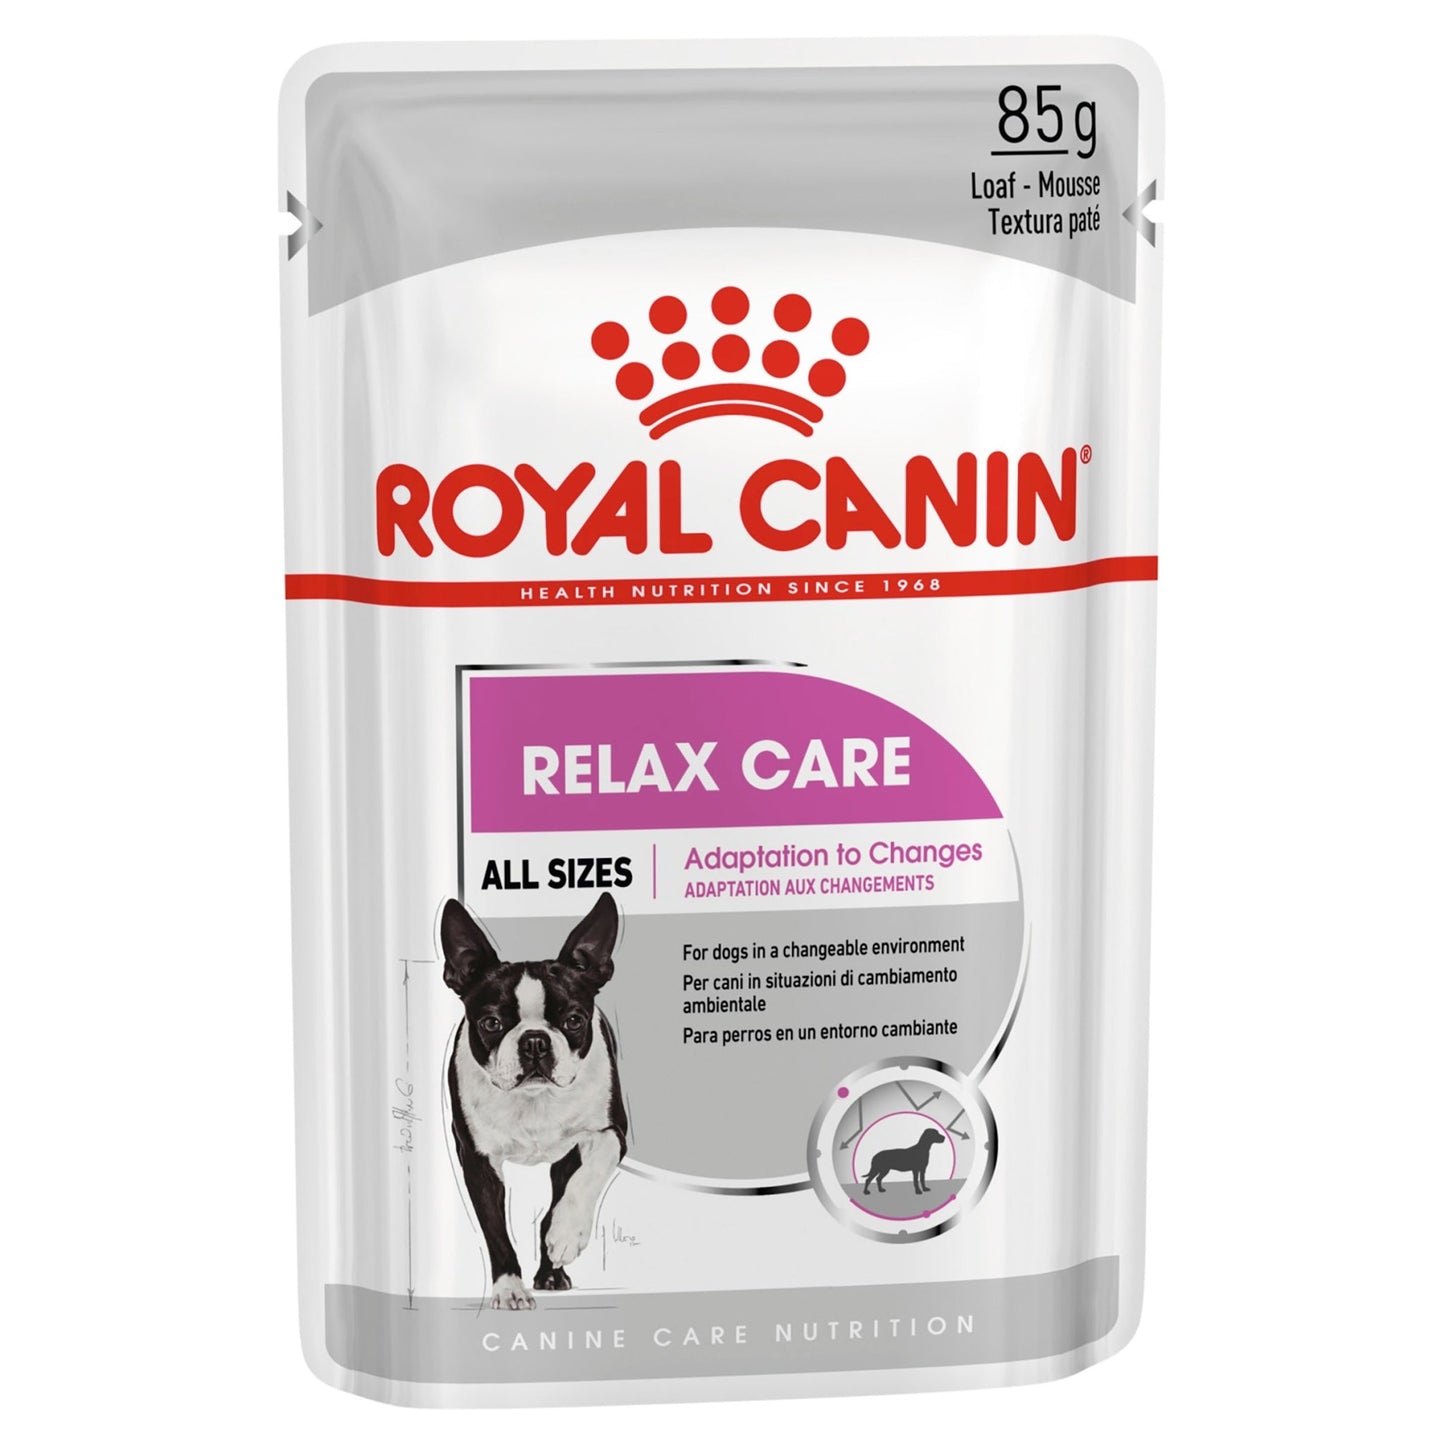 Royal Canin Wet Dog Food Relax Care Loaf 85g - Woonona Petfood & Produce